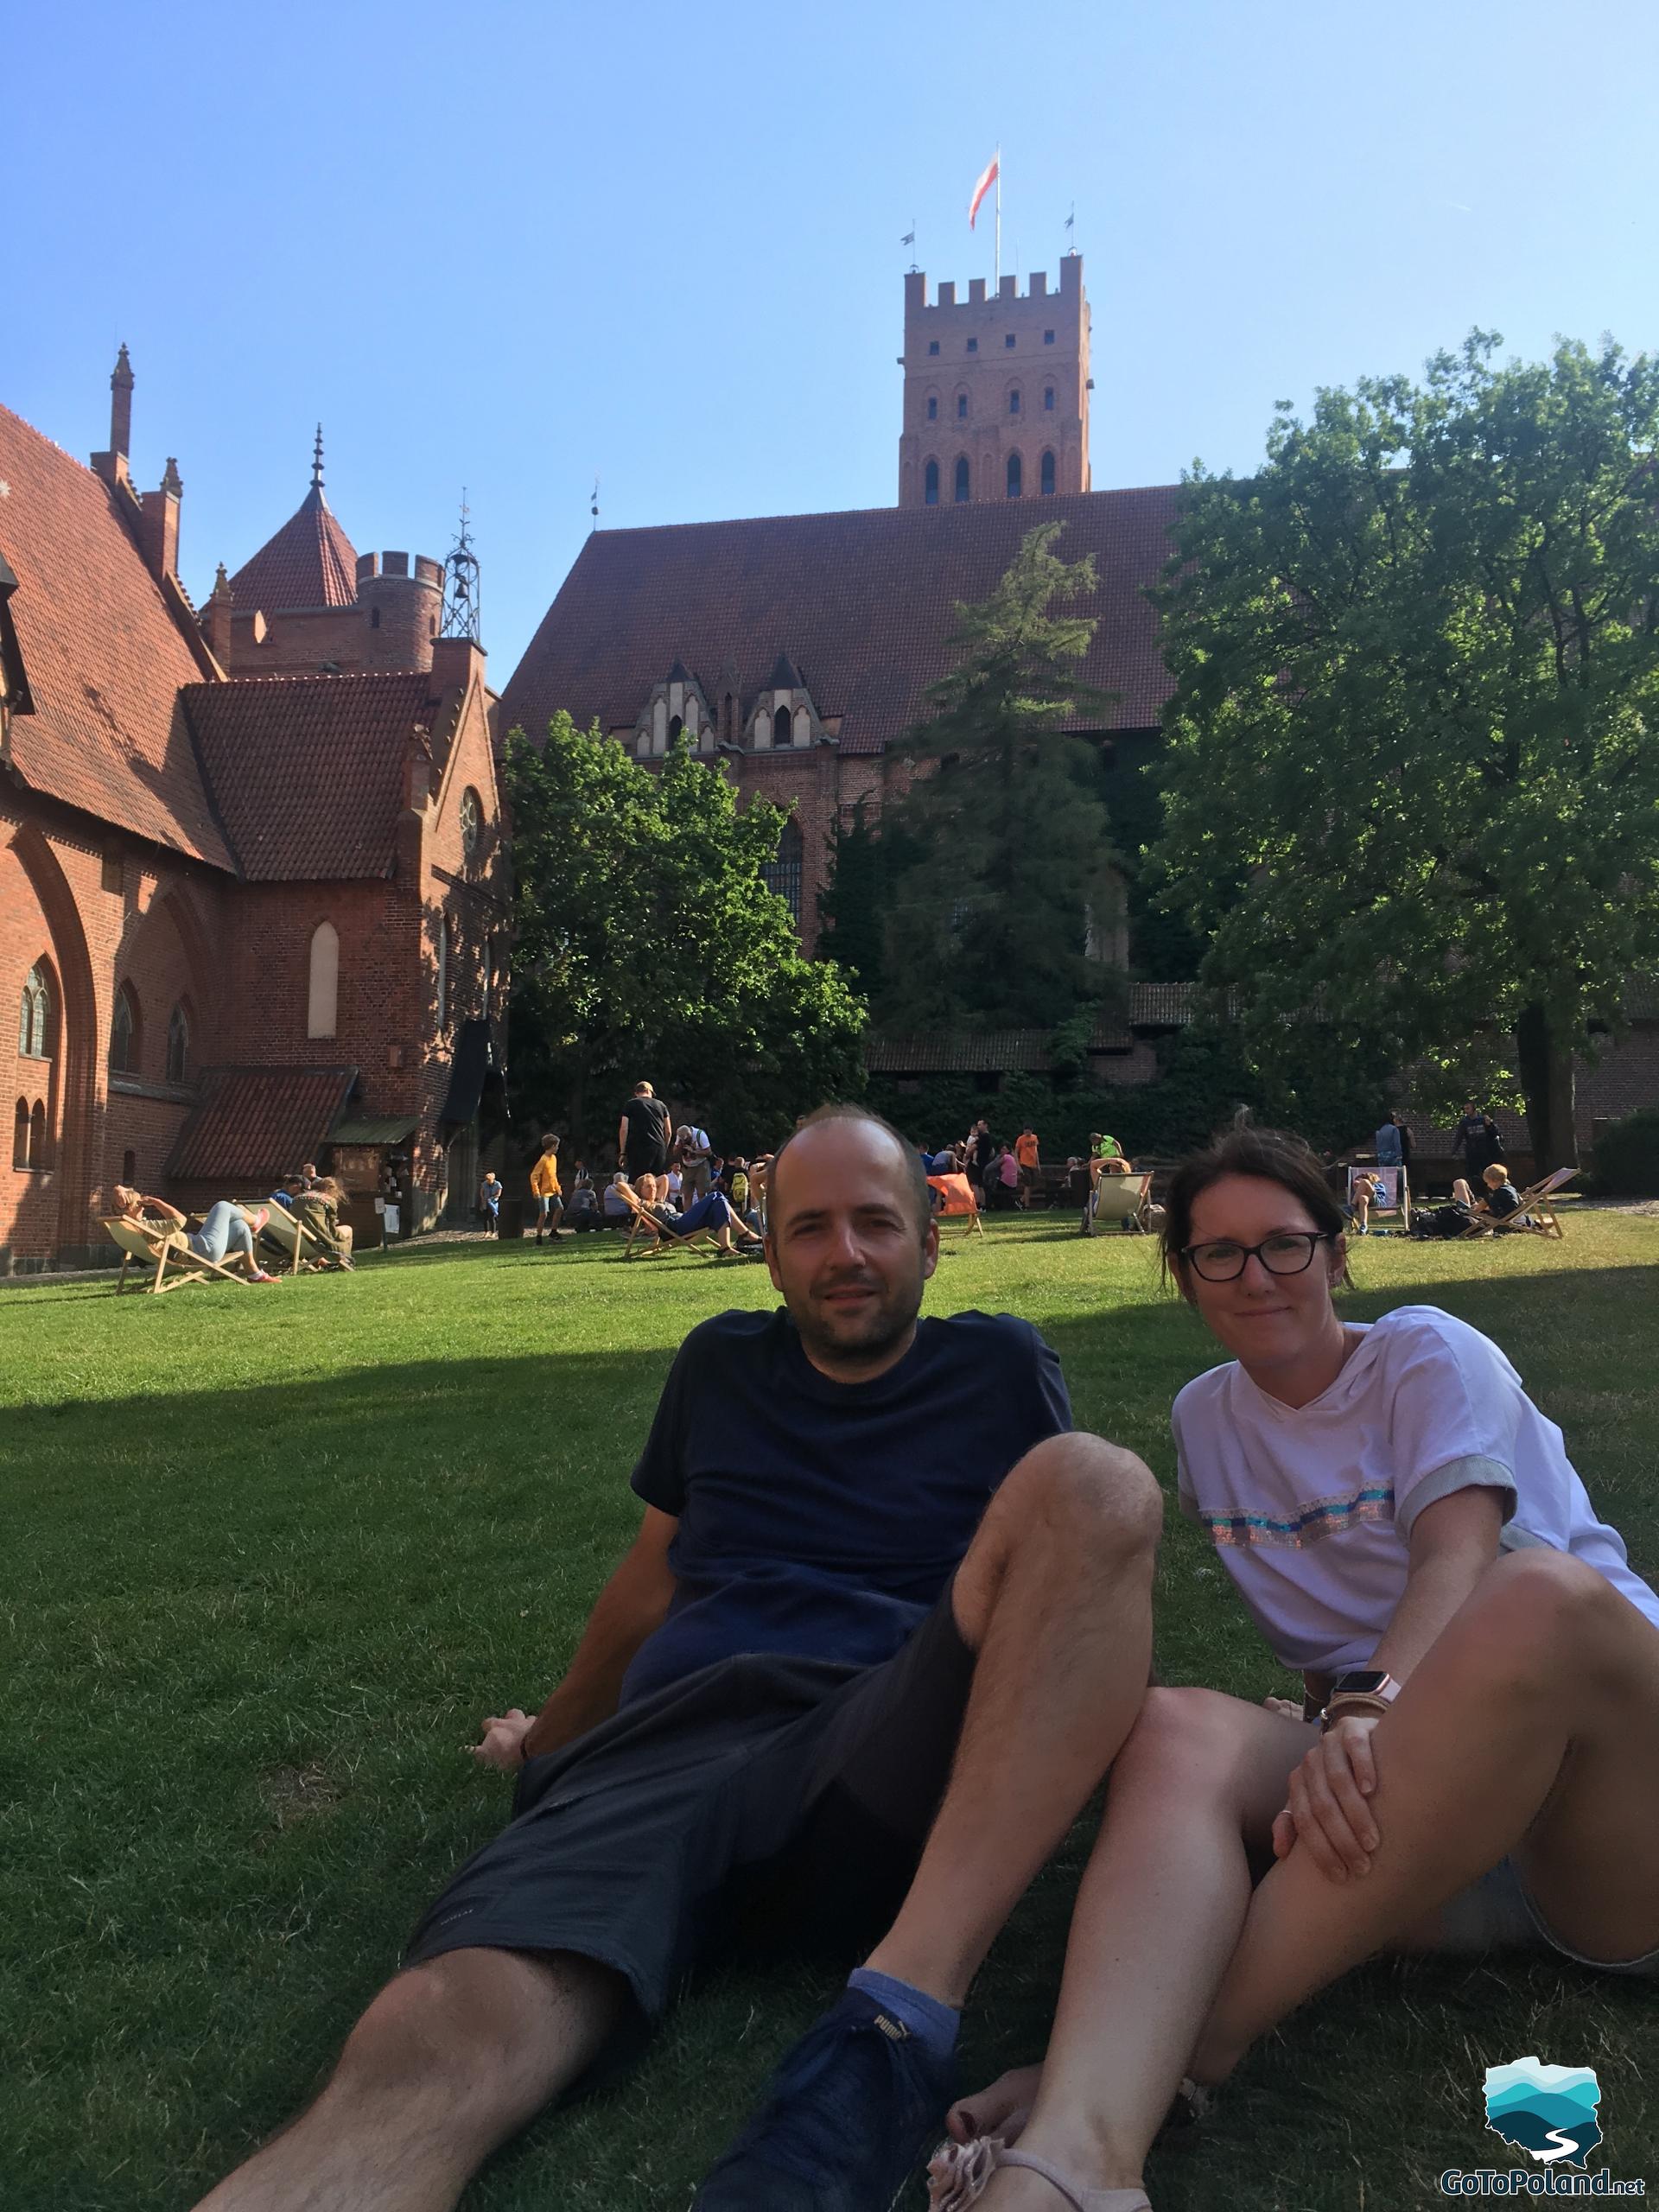 A woman and a man are sitting on the grass in the courtyard of the castle